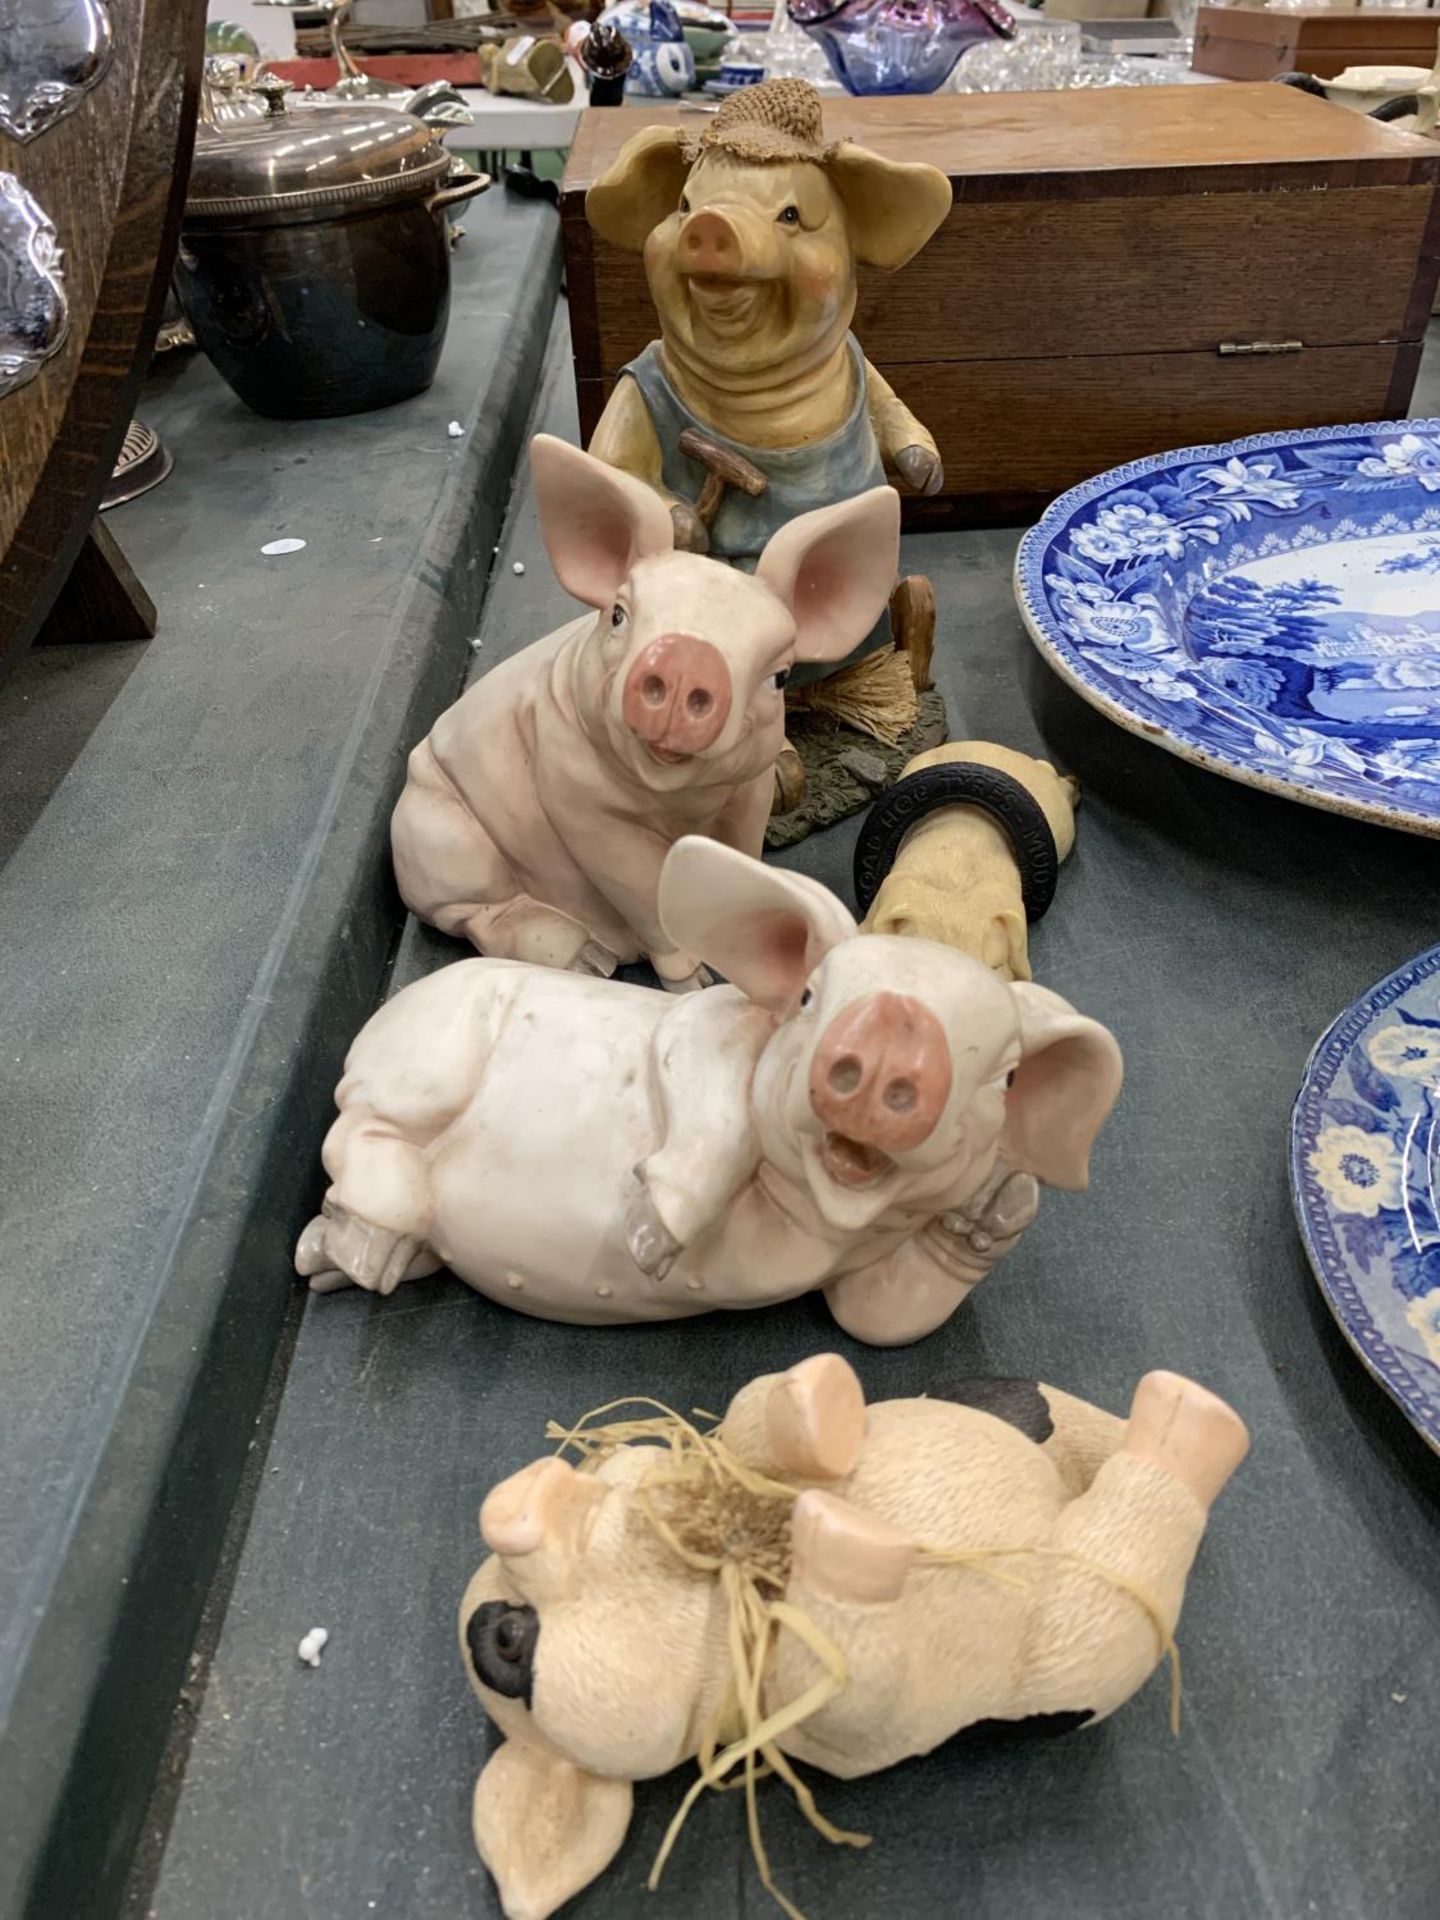 A COLLECTION OF PIG MODELS IN VARIOUS POSES - 5 IN TOTAL